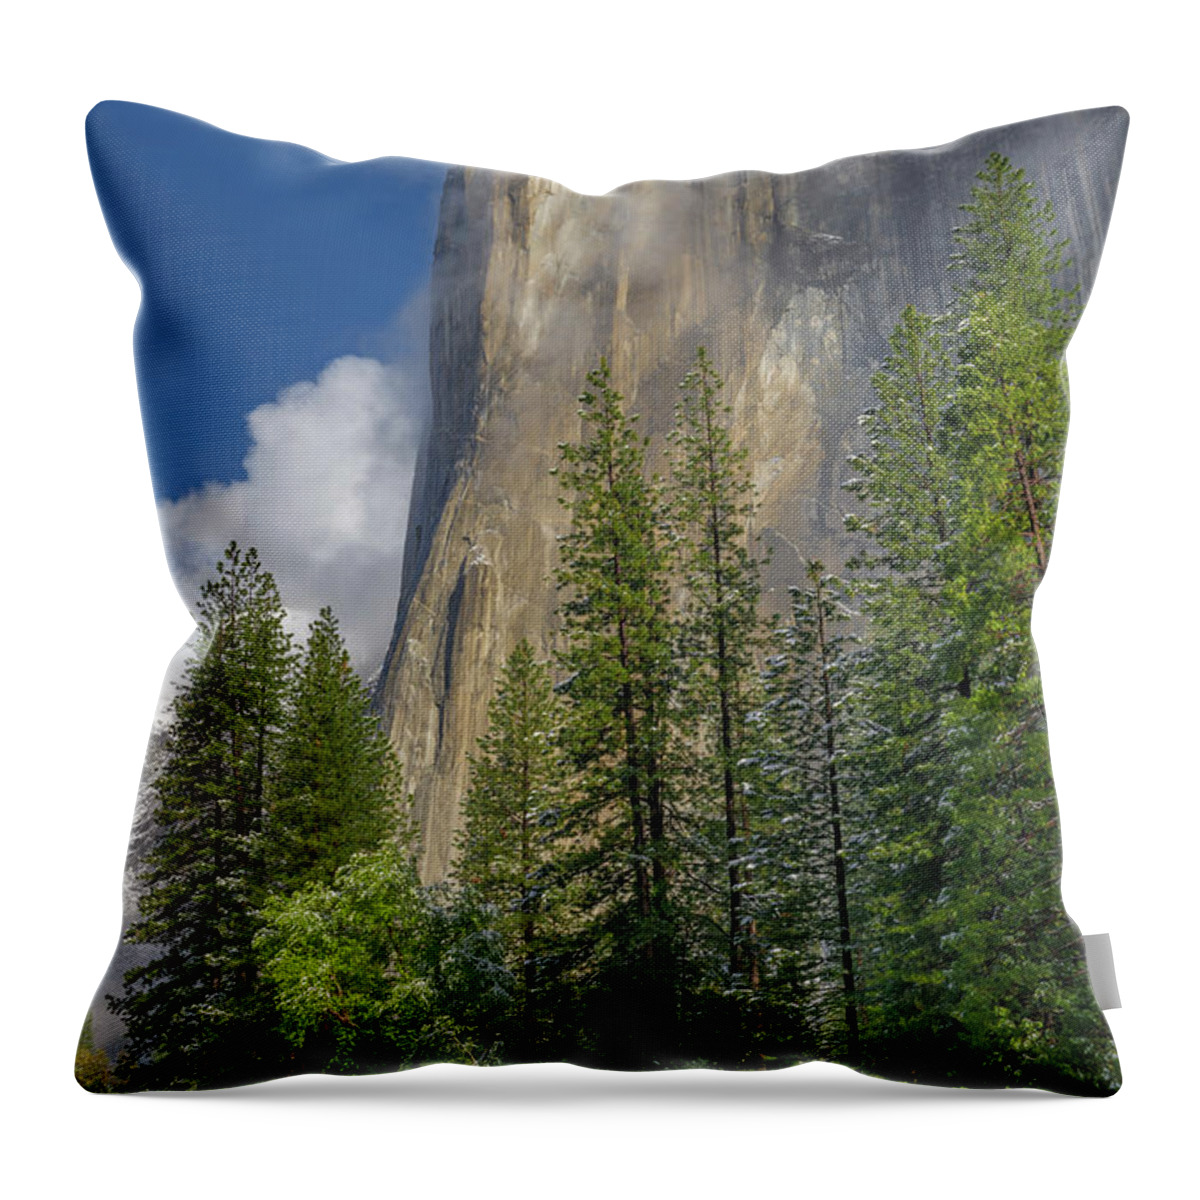 Jeff Foott Throw Pillow featuring the photograph El Capitan In The Mist by Jeff Foott